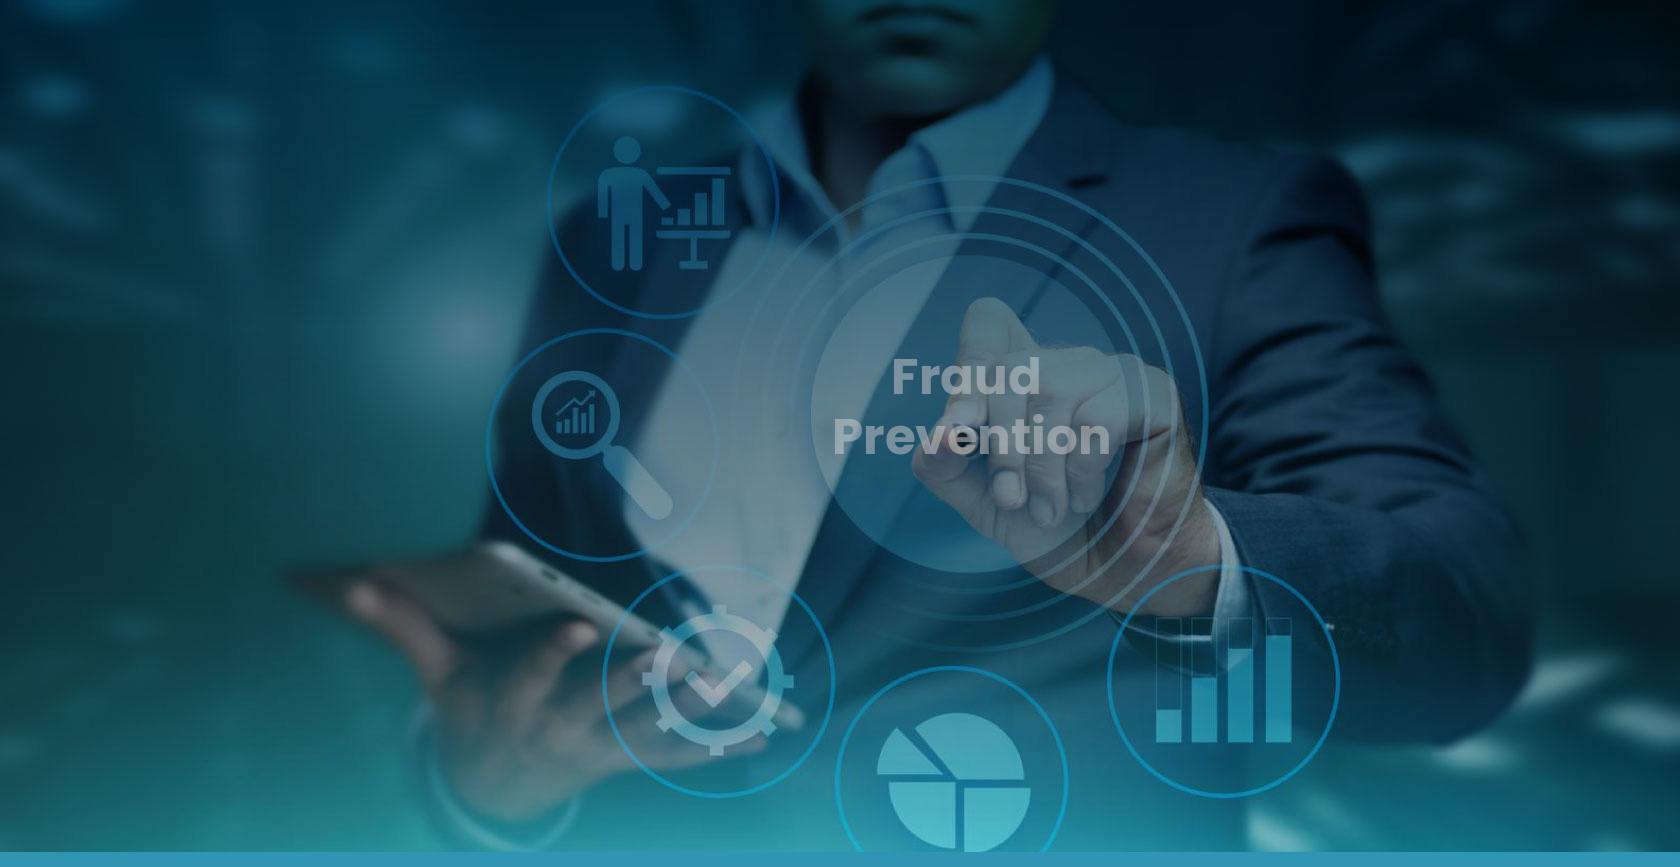 Mitigating Fraud and Financial Instability: D&B's Risk Prevention Tools